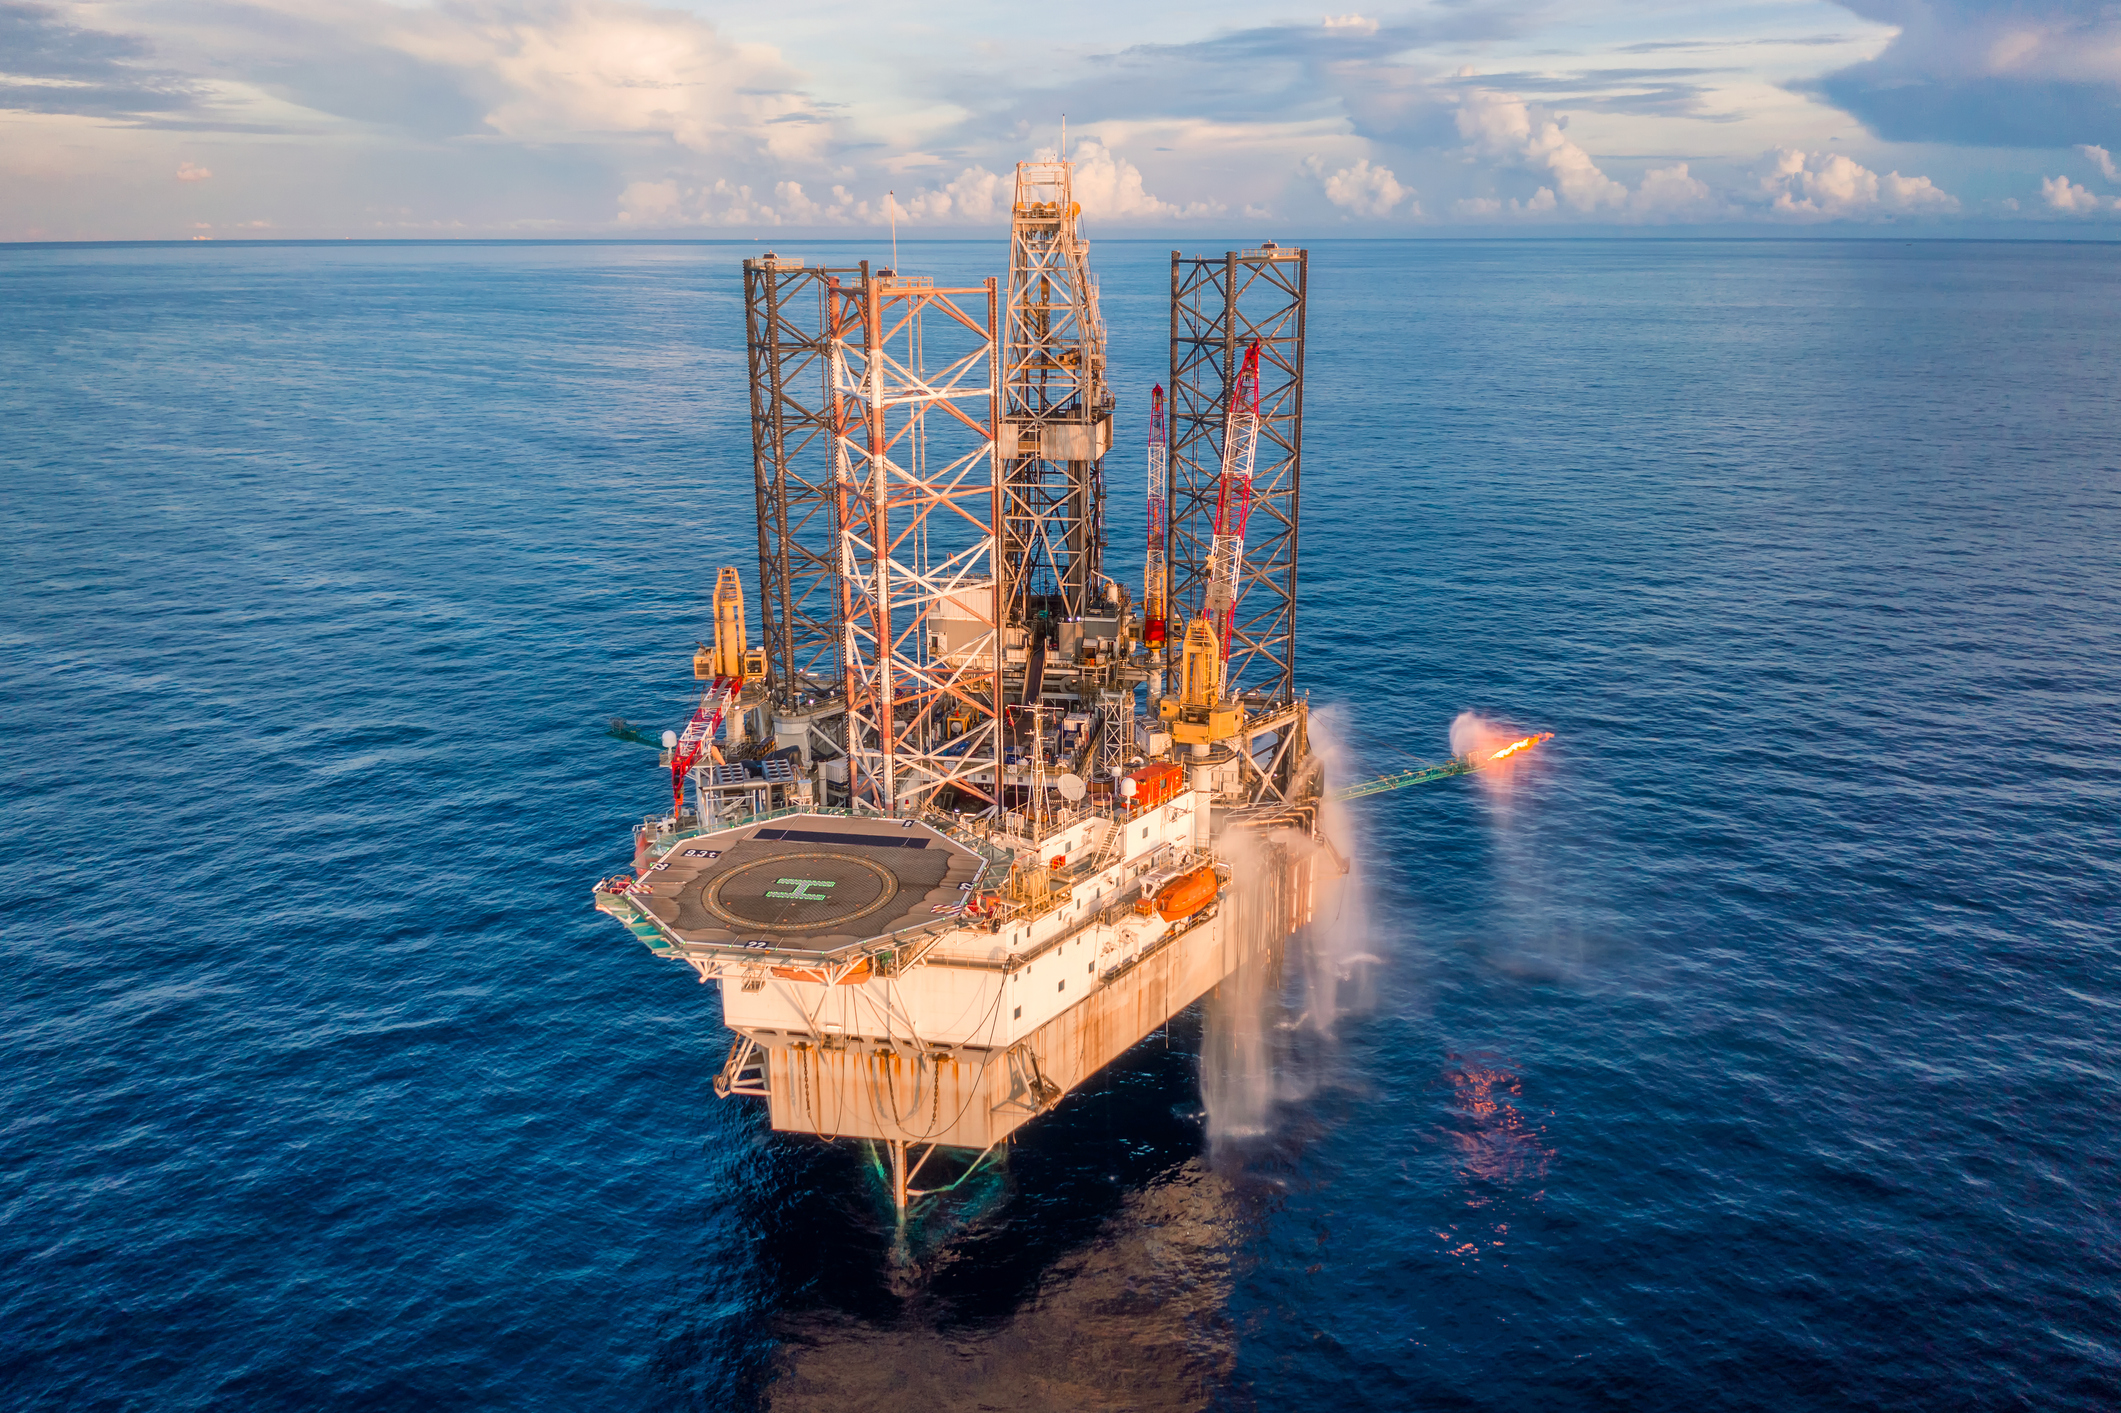 Oil and gas exploration drilling rig in the middle of gulf of Thailand, offshore Malaysia. (Mekdet—Getty Images)